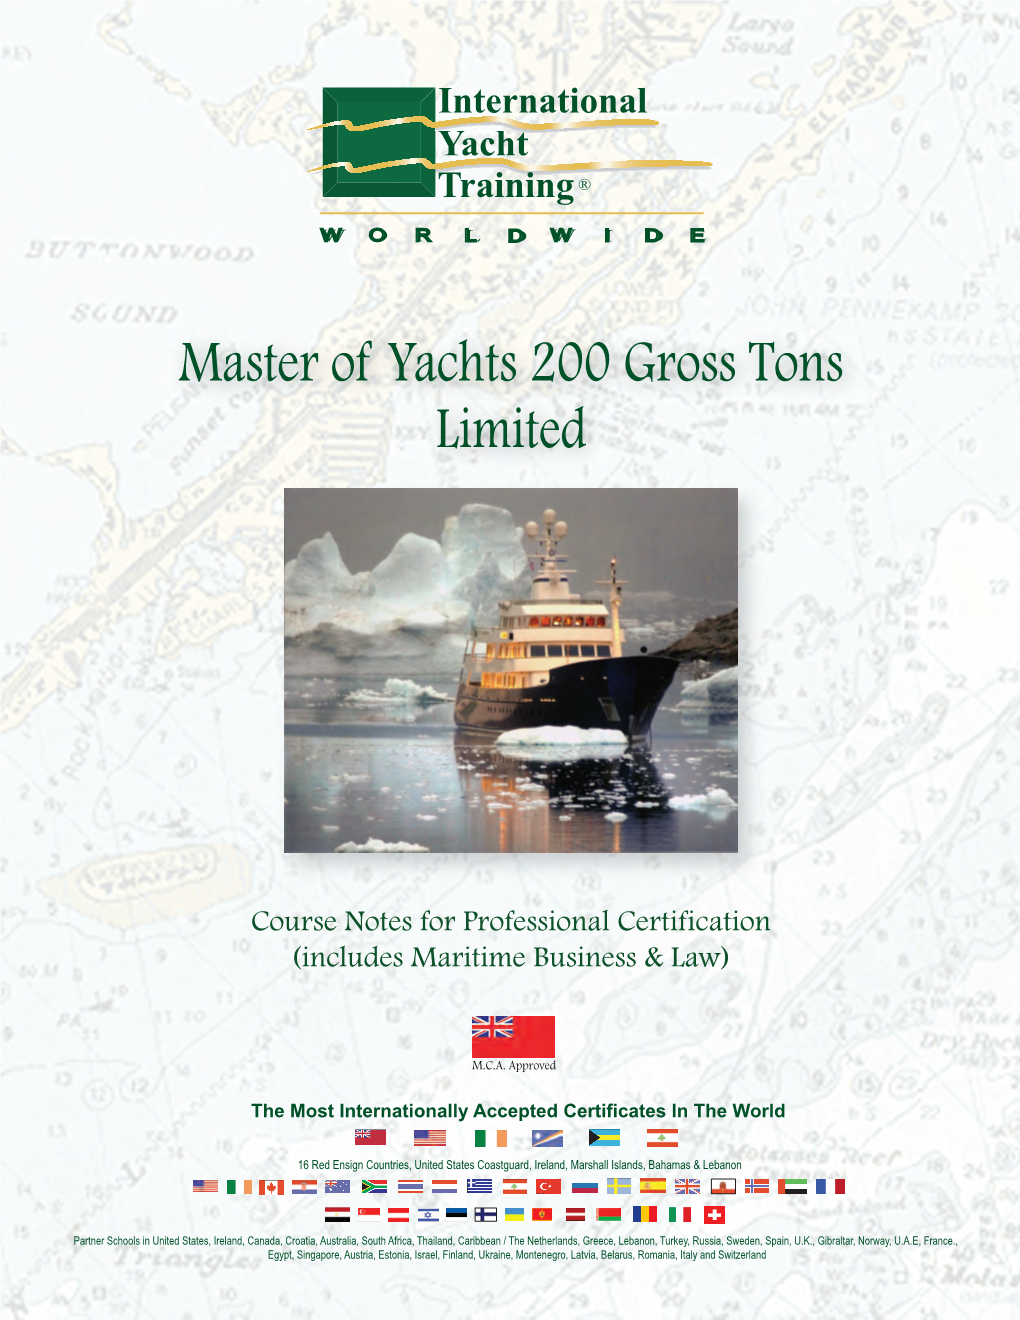 Master of Yachts 200 Gross Tons Limited